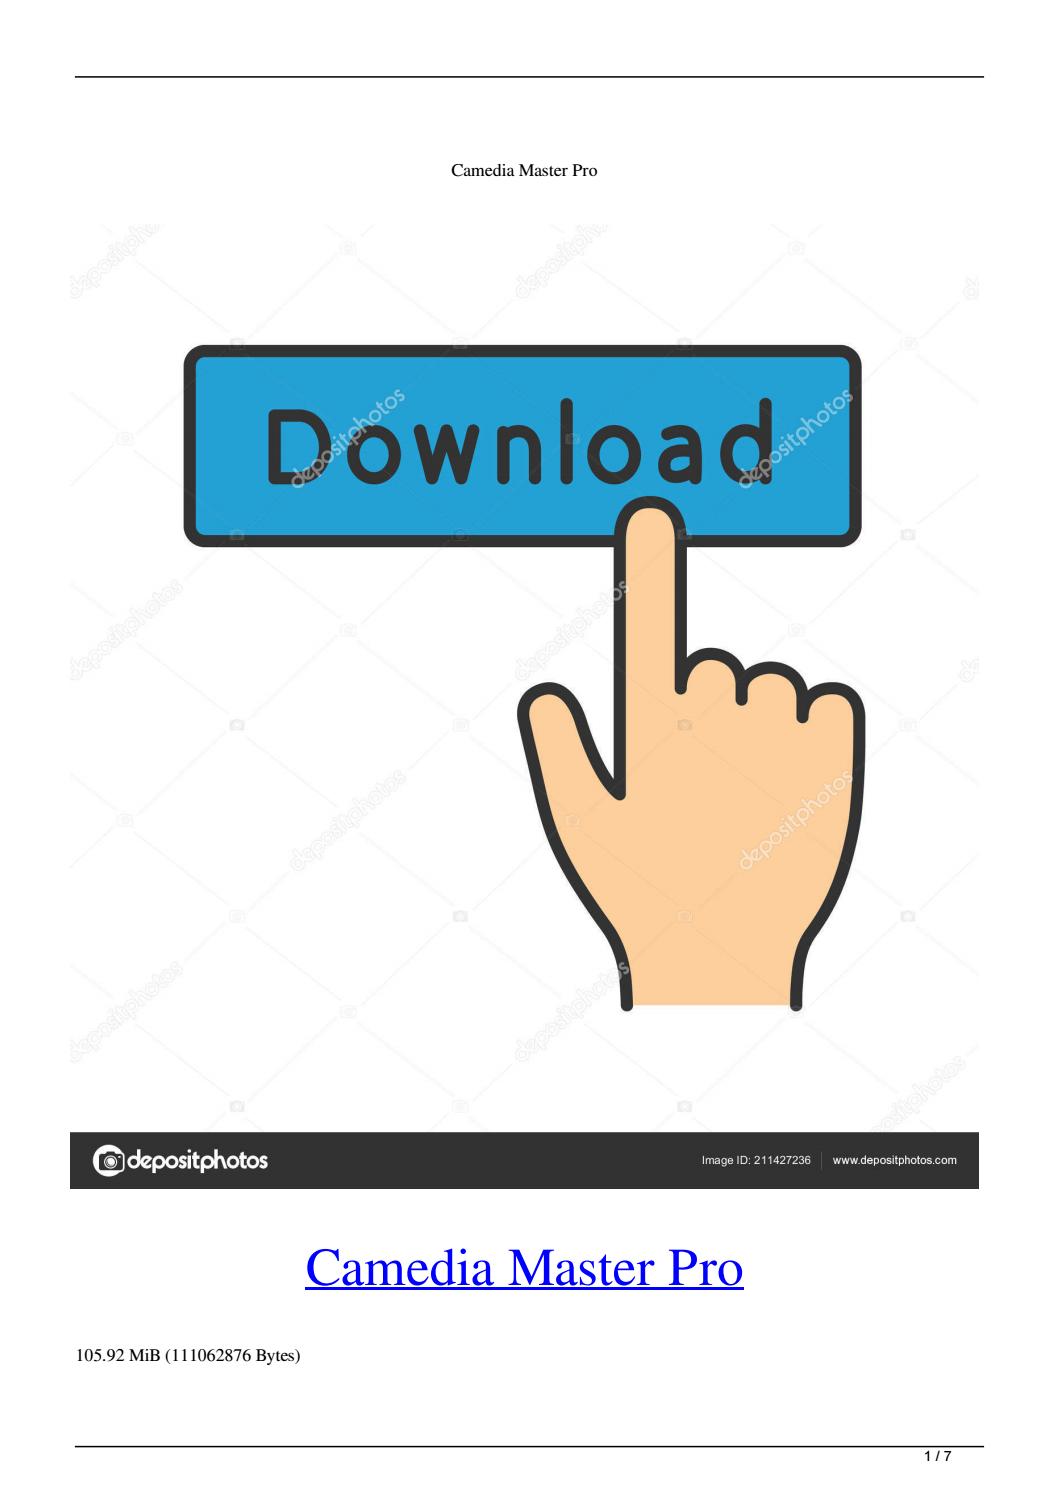 camedia master software free download